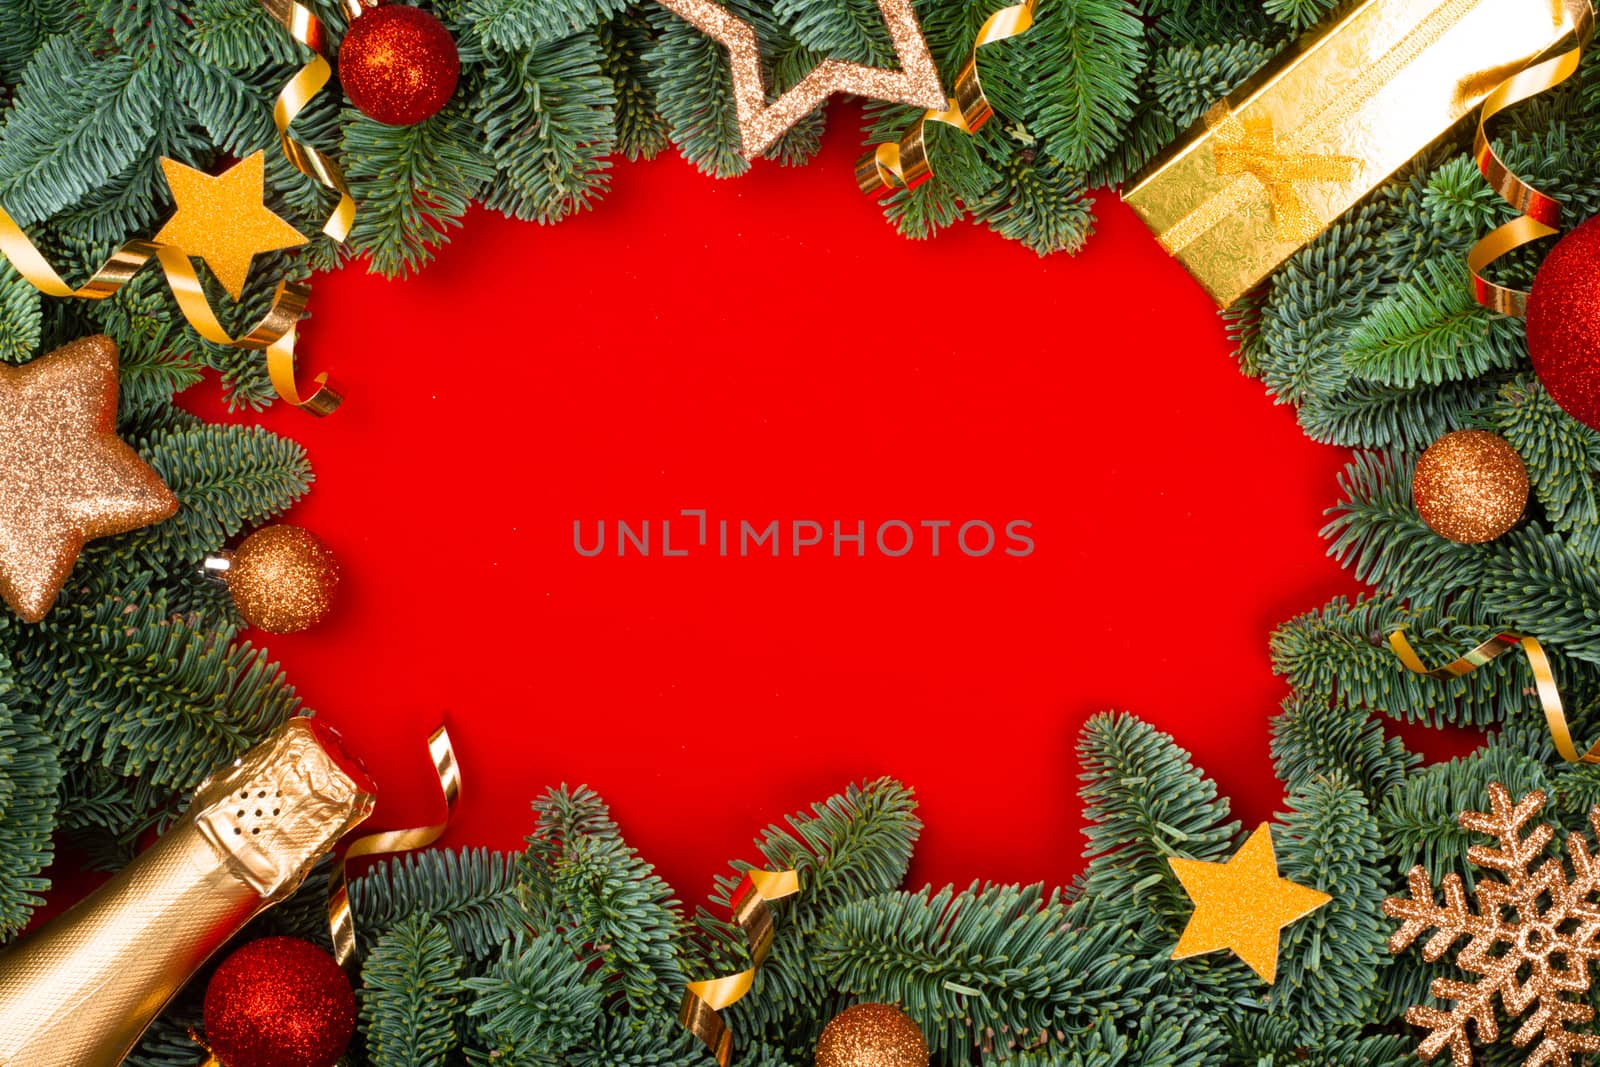 Christmas fir tree branches and baubles decor border frame on red background with copy space for text